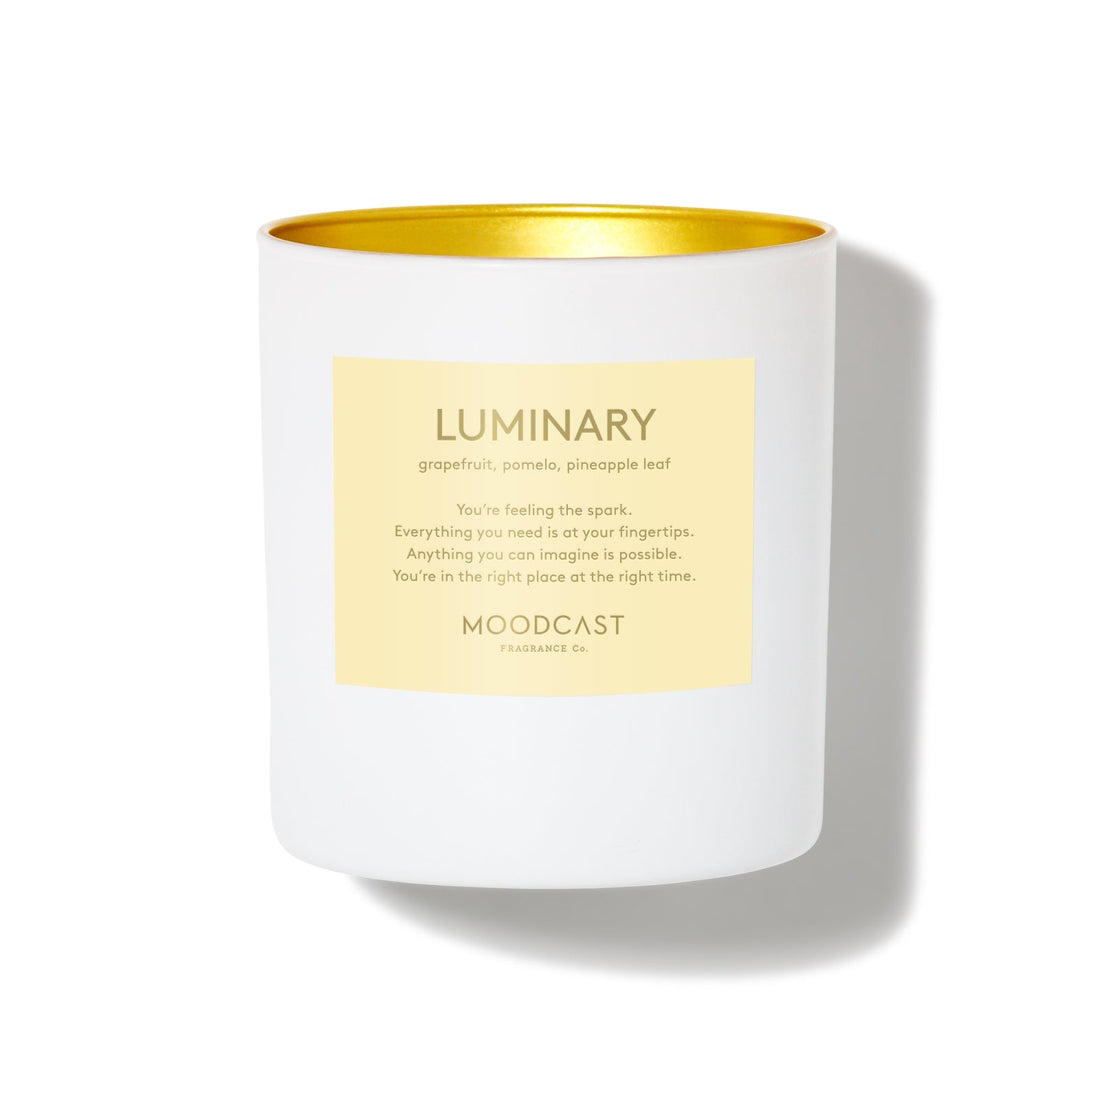 Luminary - Persona Collection (White & Gold) - 8oz/227g Coconut Wax Blend Glass Jar Candle - Key Notes: Grapefruit, Pomelo, Pineapple Leaf